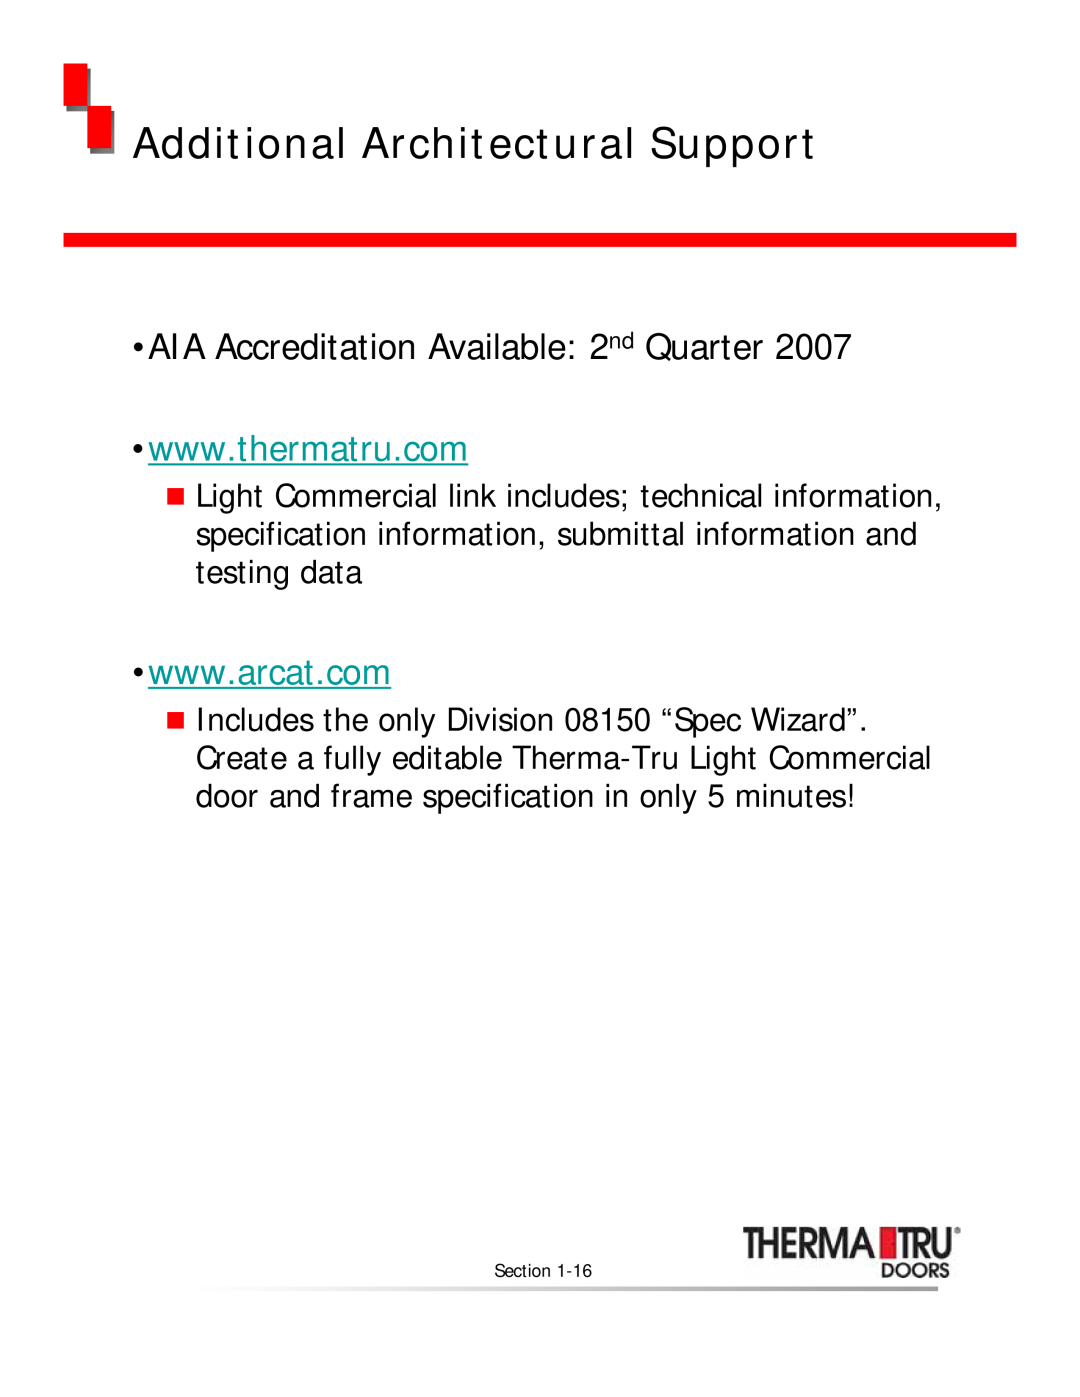 Therma-Tru none manual Additional Architectural Support, AIA Accreditation Available 2nd Quarter 